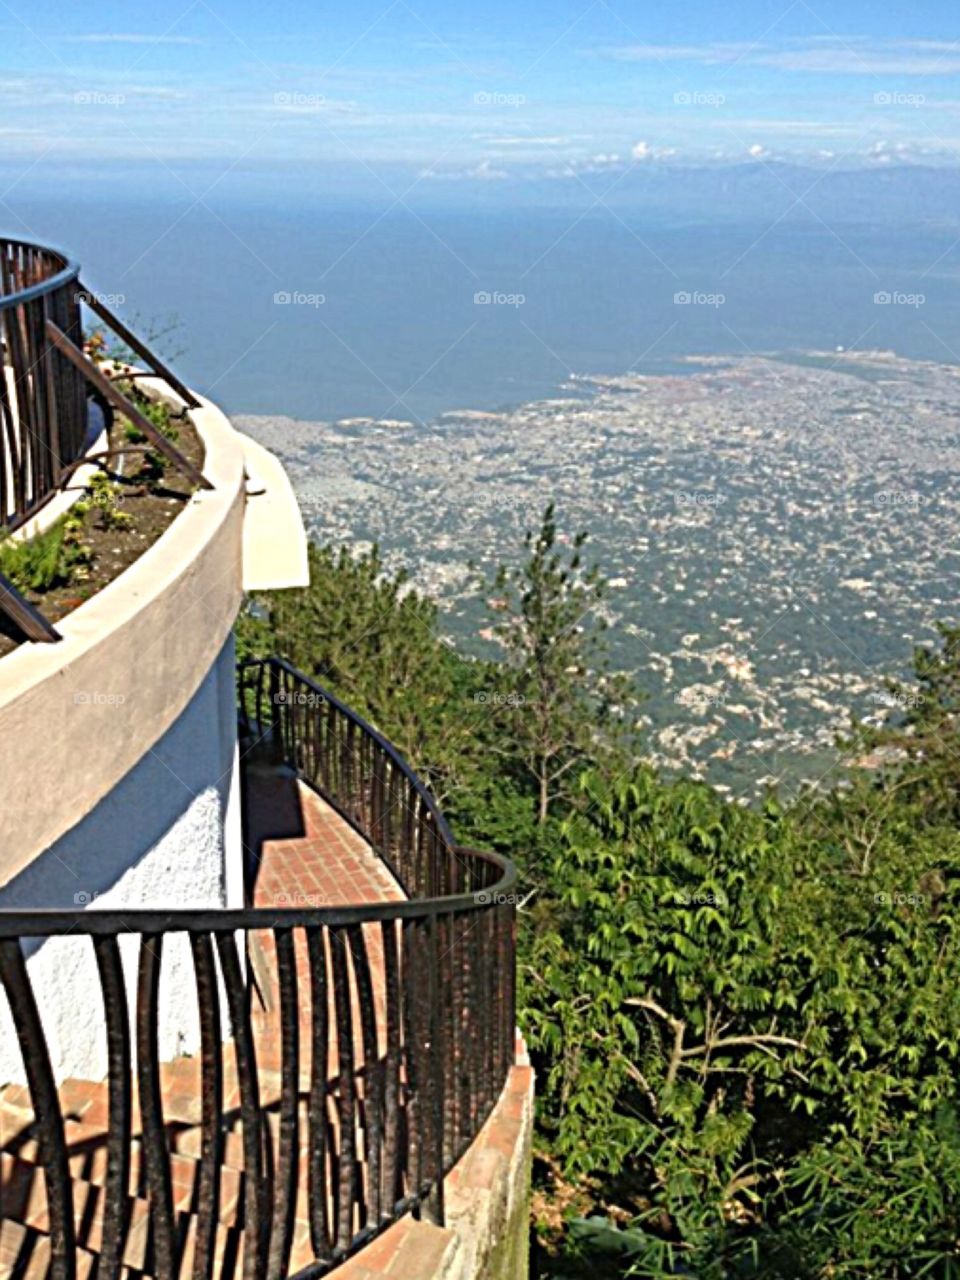 View of Haiti from above